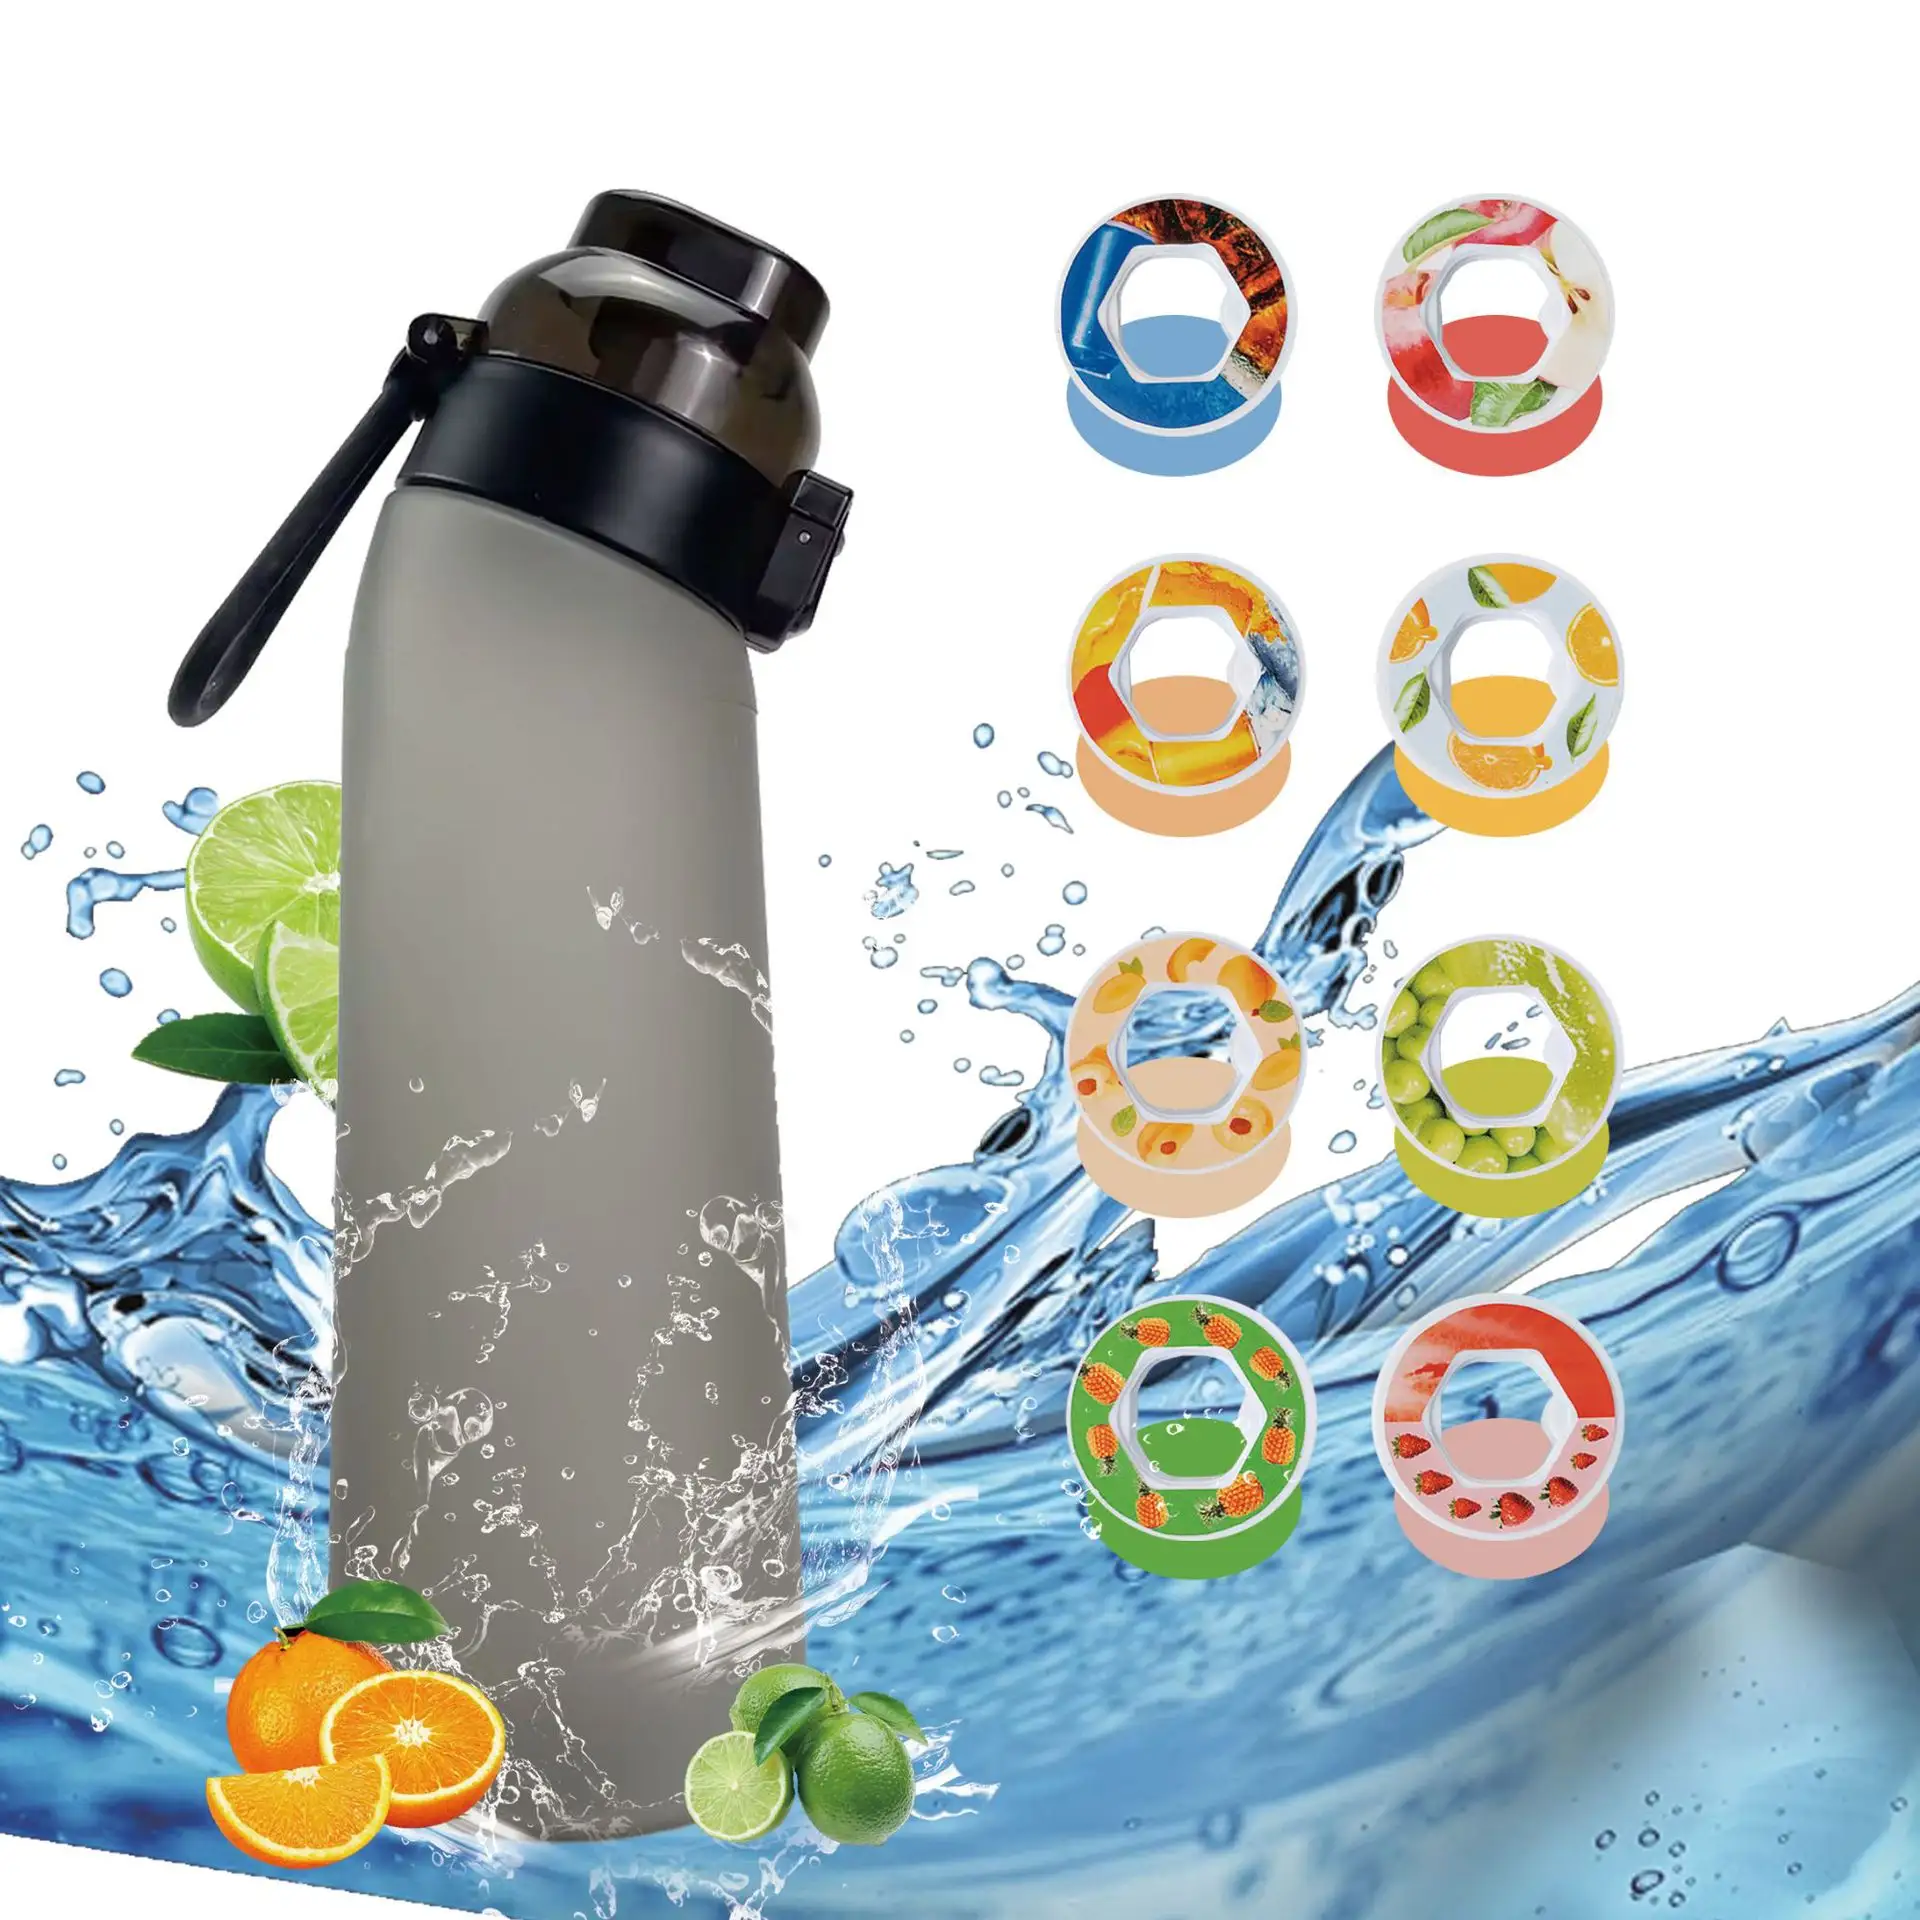 Flavored Water Bottle with Flavour Pods Air Water Up Bottle Frosted 650ml Air Starter Up Set Water Cup for Camping Fishing